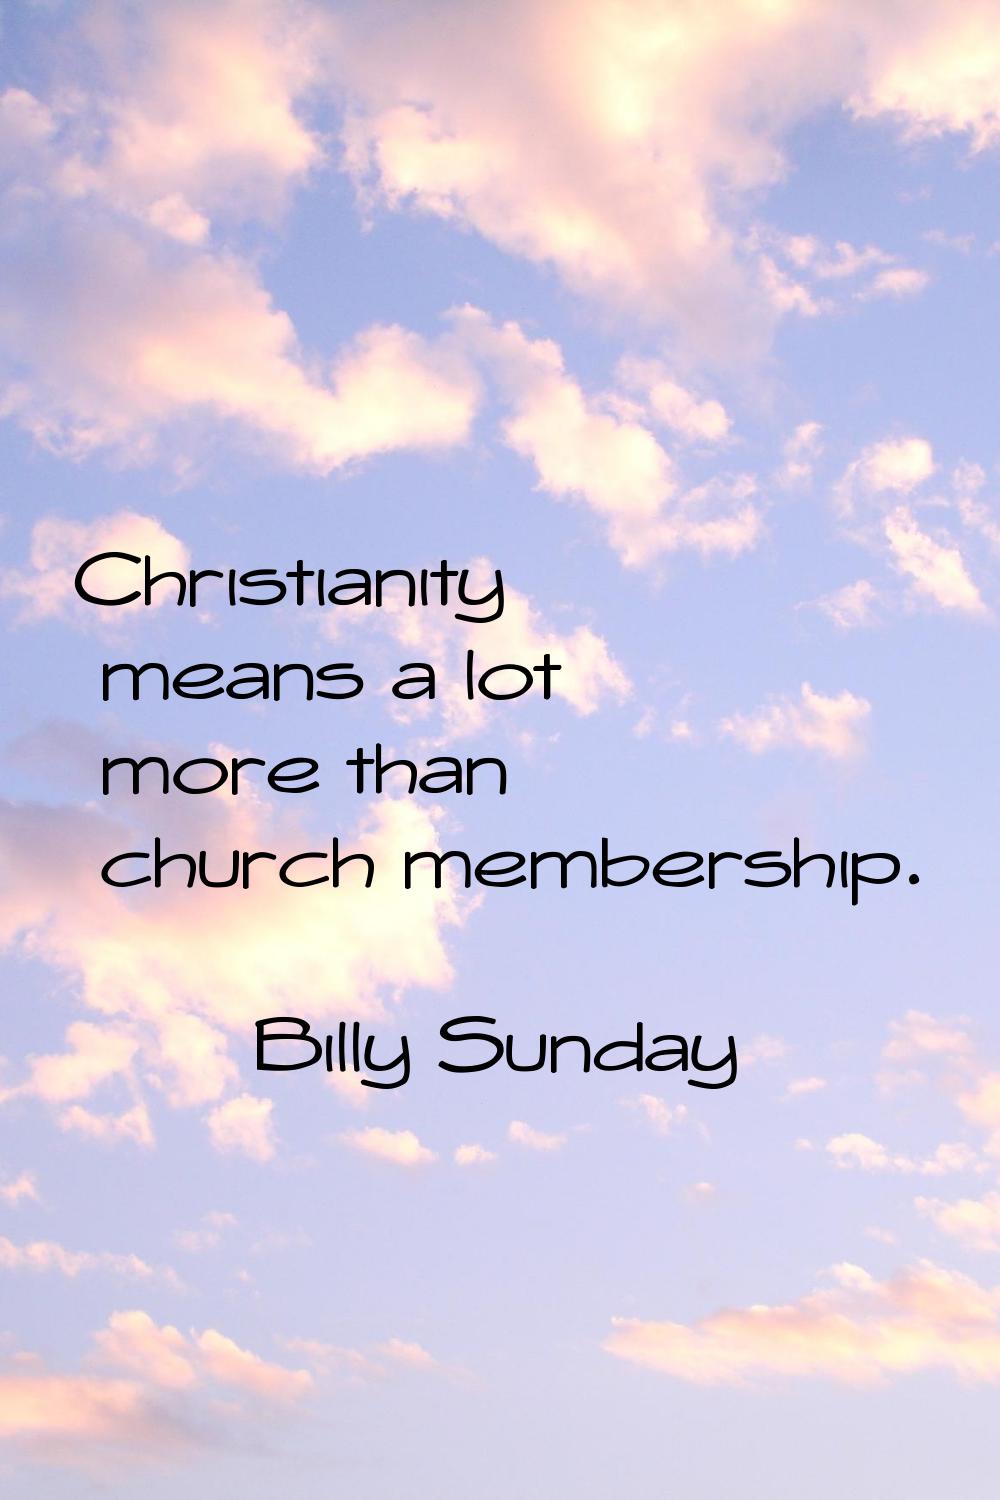 Christianity means a lot more than church membership.